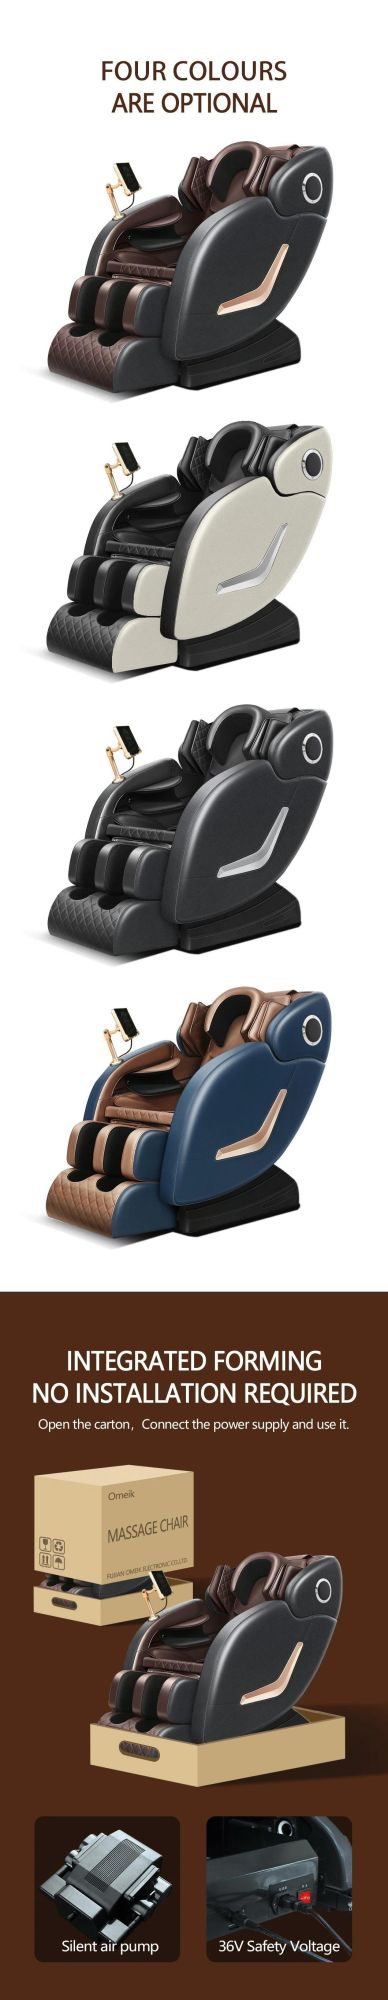 Wholesale High Quality Leisure Human Body Health Care Full Body Thai Streching Massage Chair with Touch Screen Remote Control